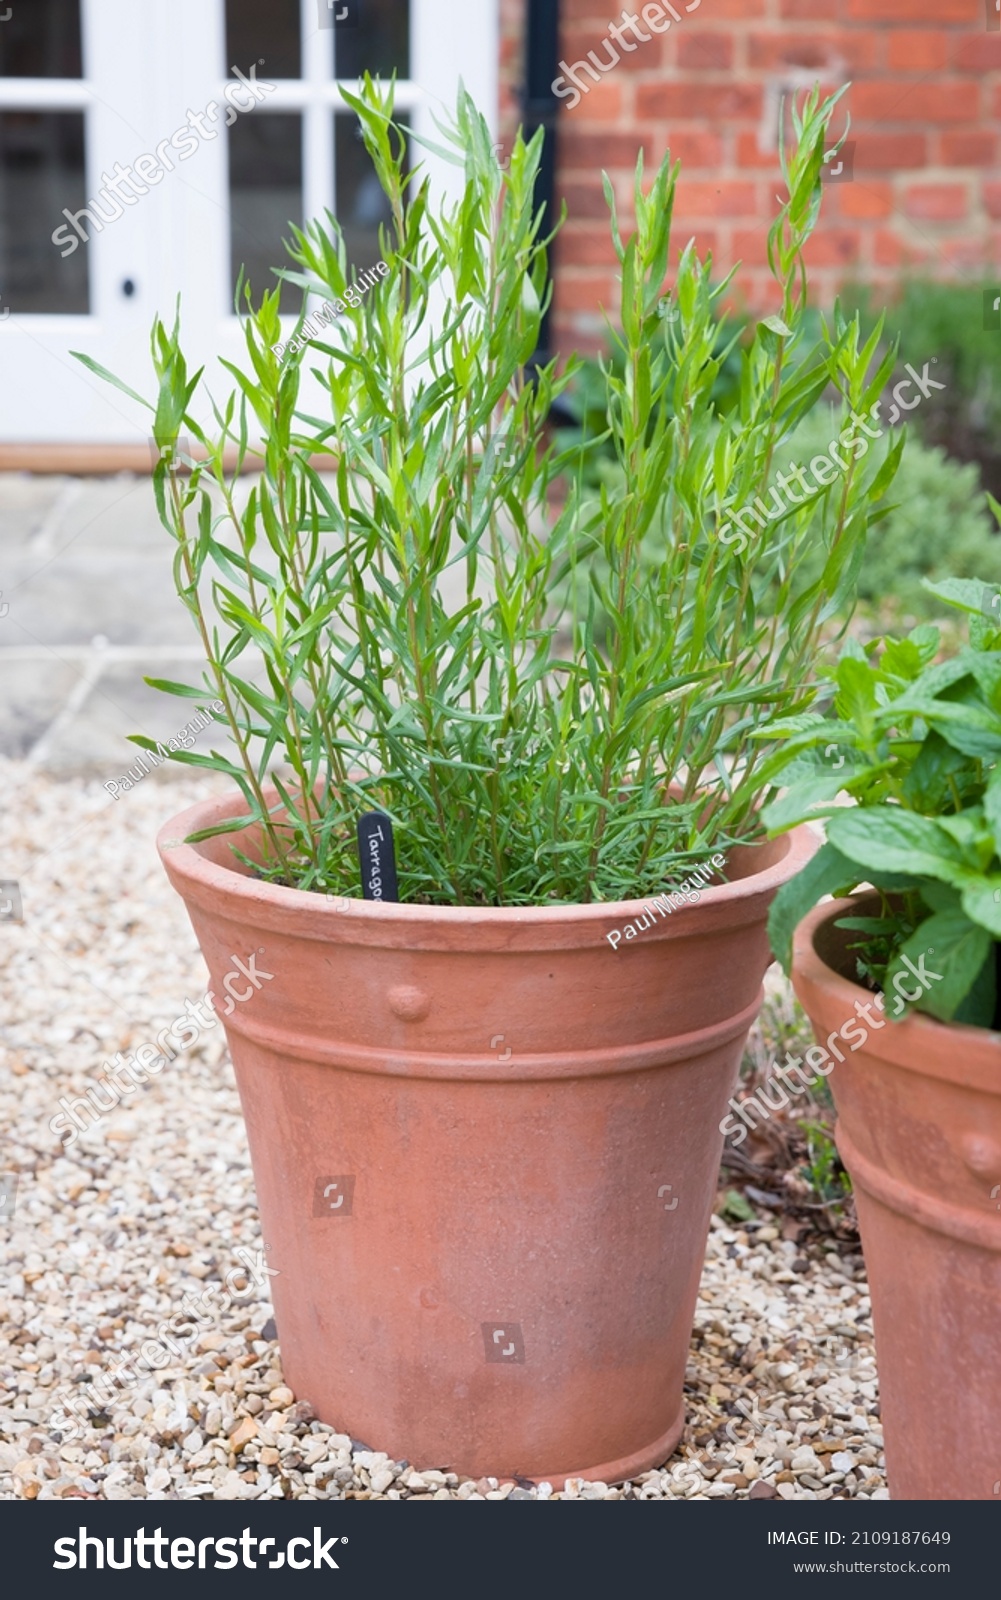 French tarragon, herb plant growing in a terracotta pot in a UK kitchen garden #2109187649